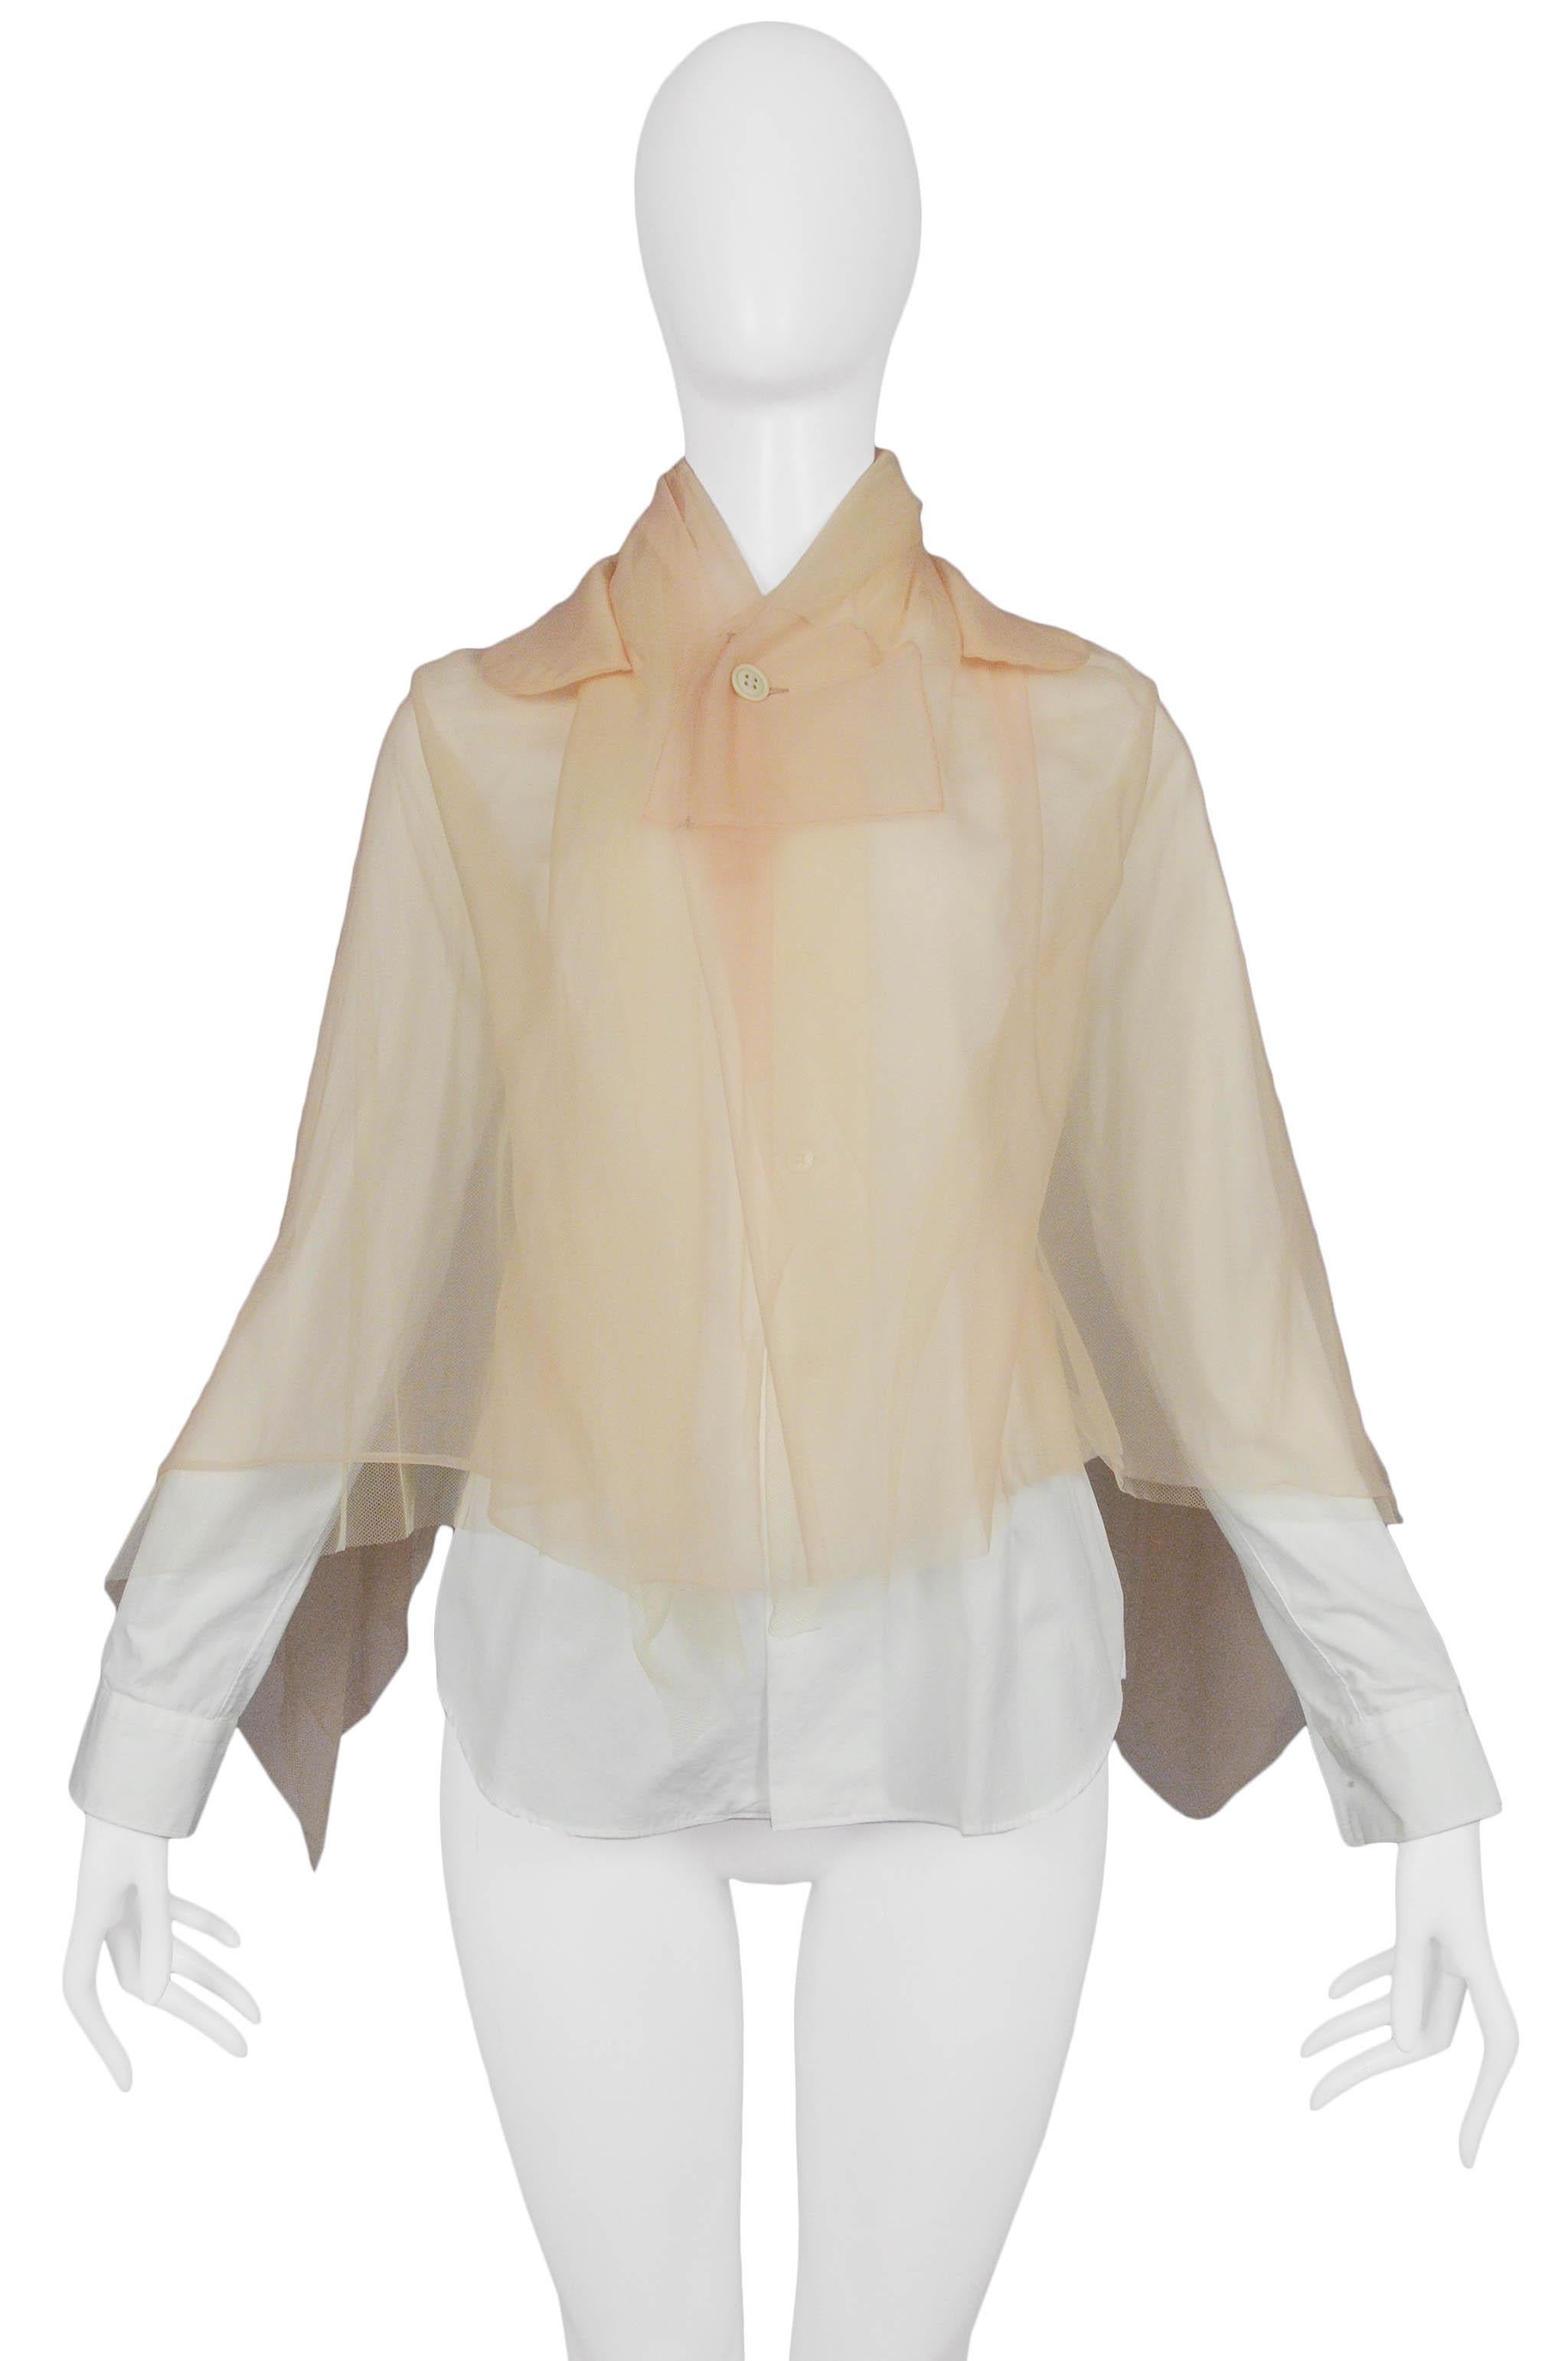 Resurrection Vintage is excited to offer a vintage Comme des Garcons white button-down shirt with nude shawl mesh overlay. From the 2009 collection. 

Comme Des Garcons
Size: XS
Fabric: Mesh & Woven
2009 Collection
Excellent Vintage Condition